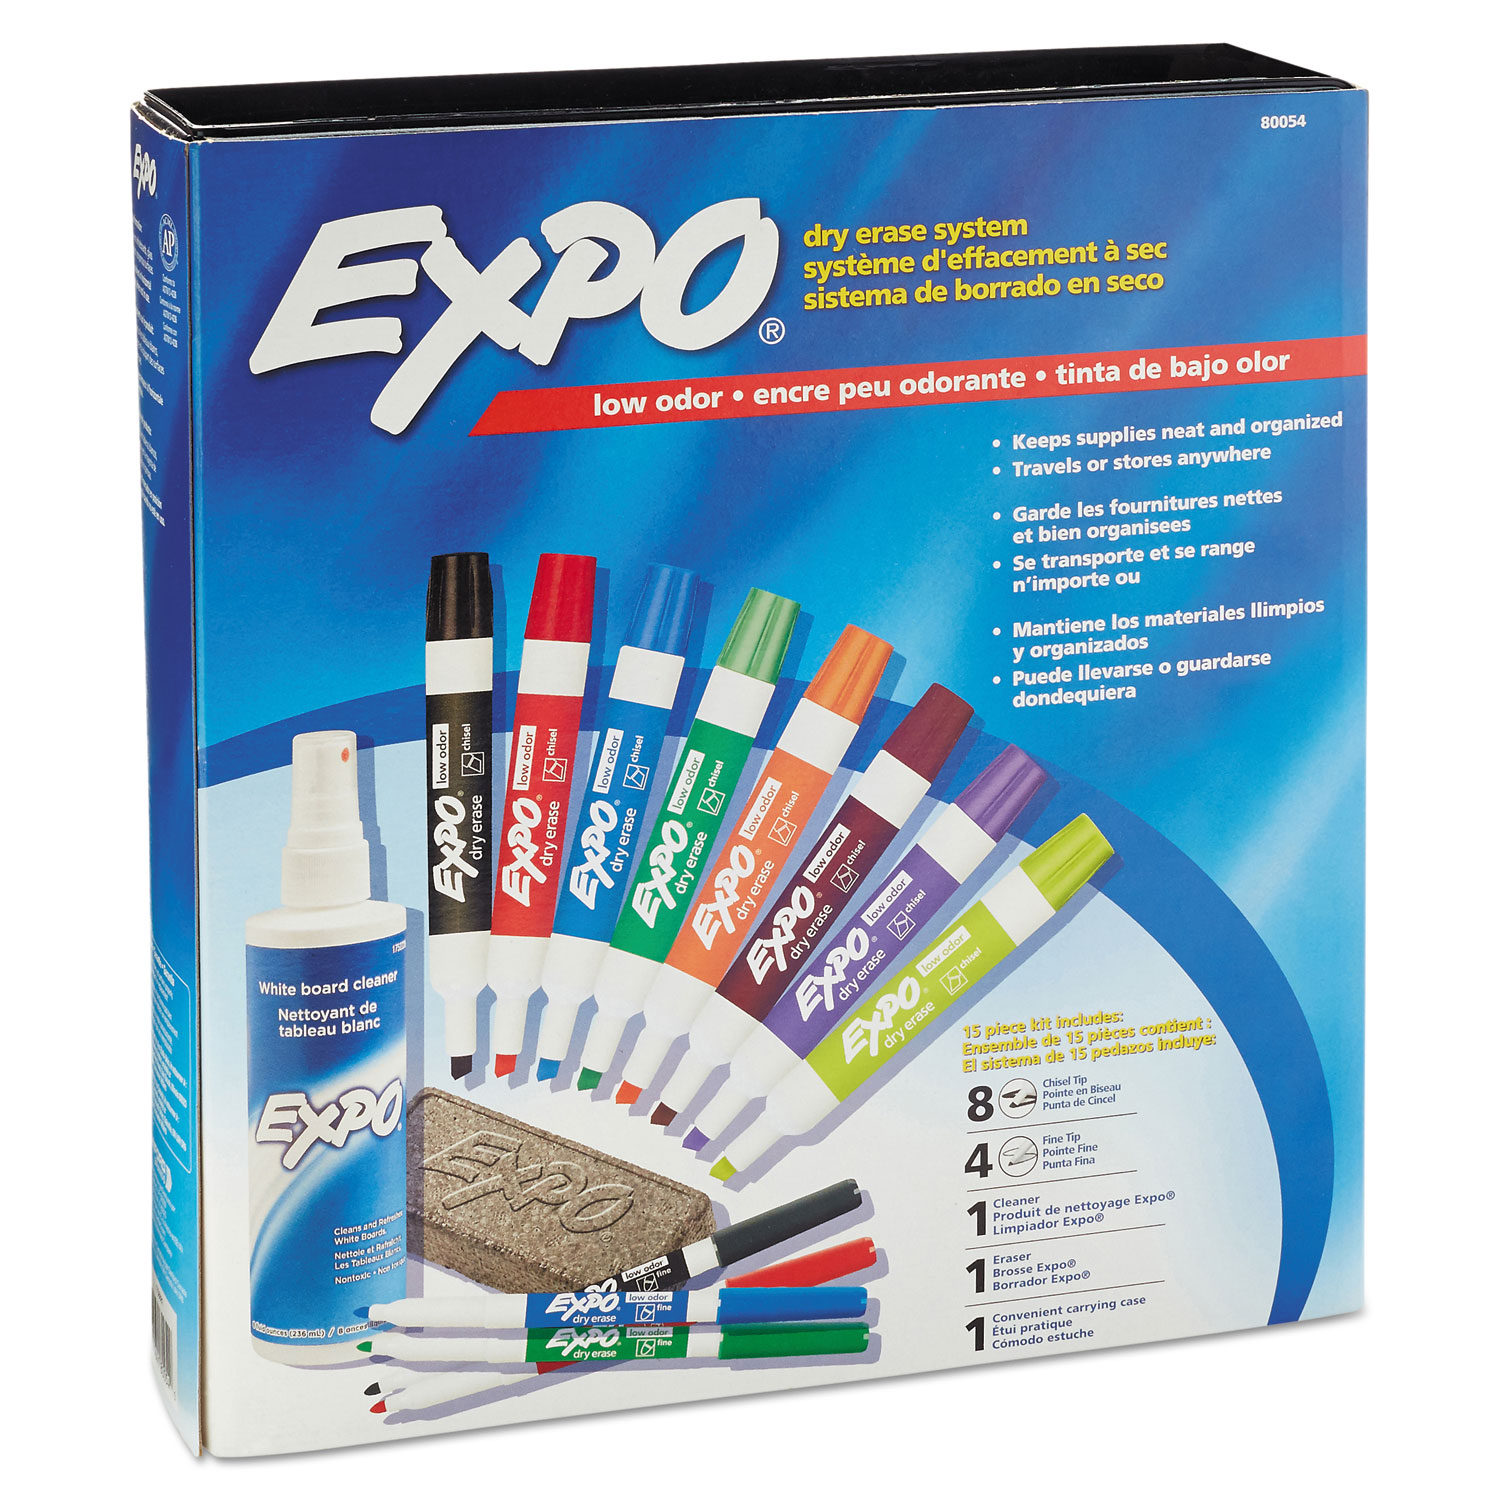 EXPO Low Odor Dry Erase Markers, Chisel Tip, Assorted Colors, 12 Count 